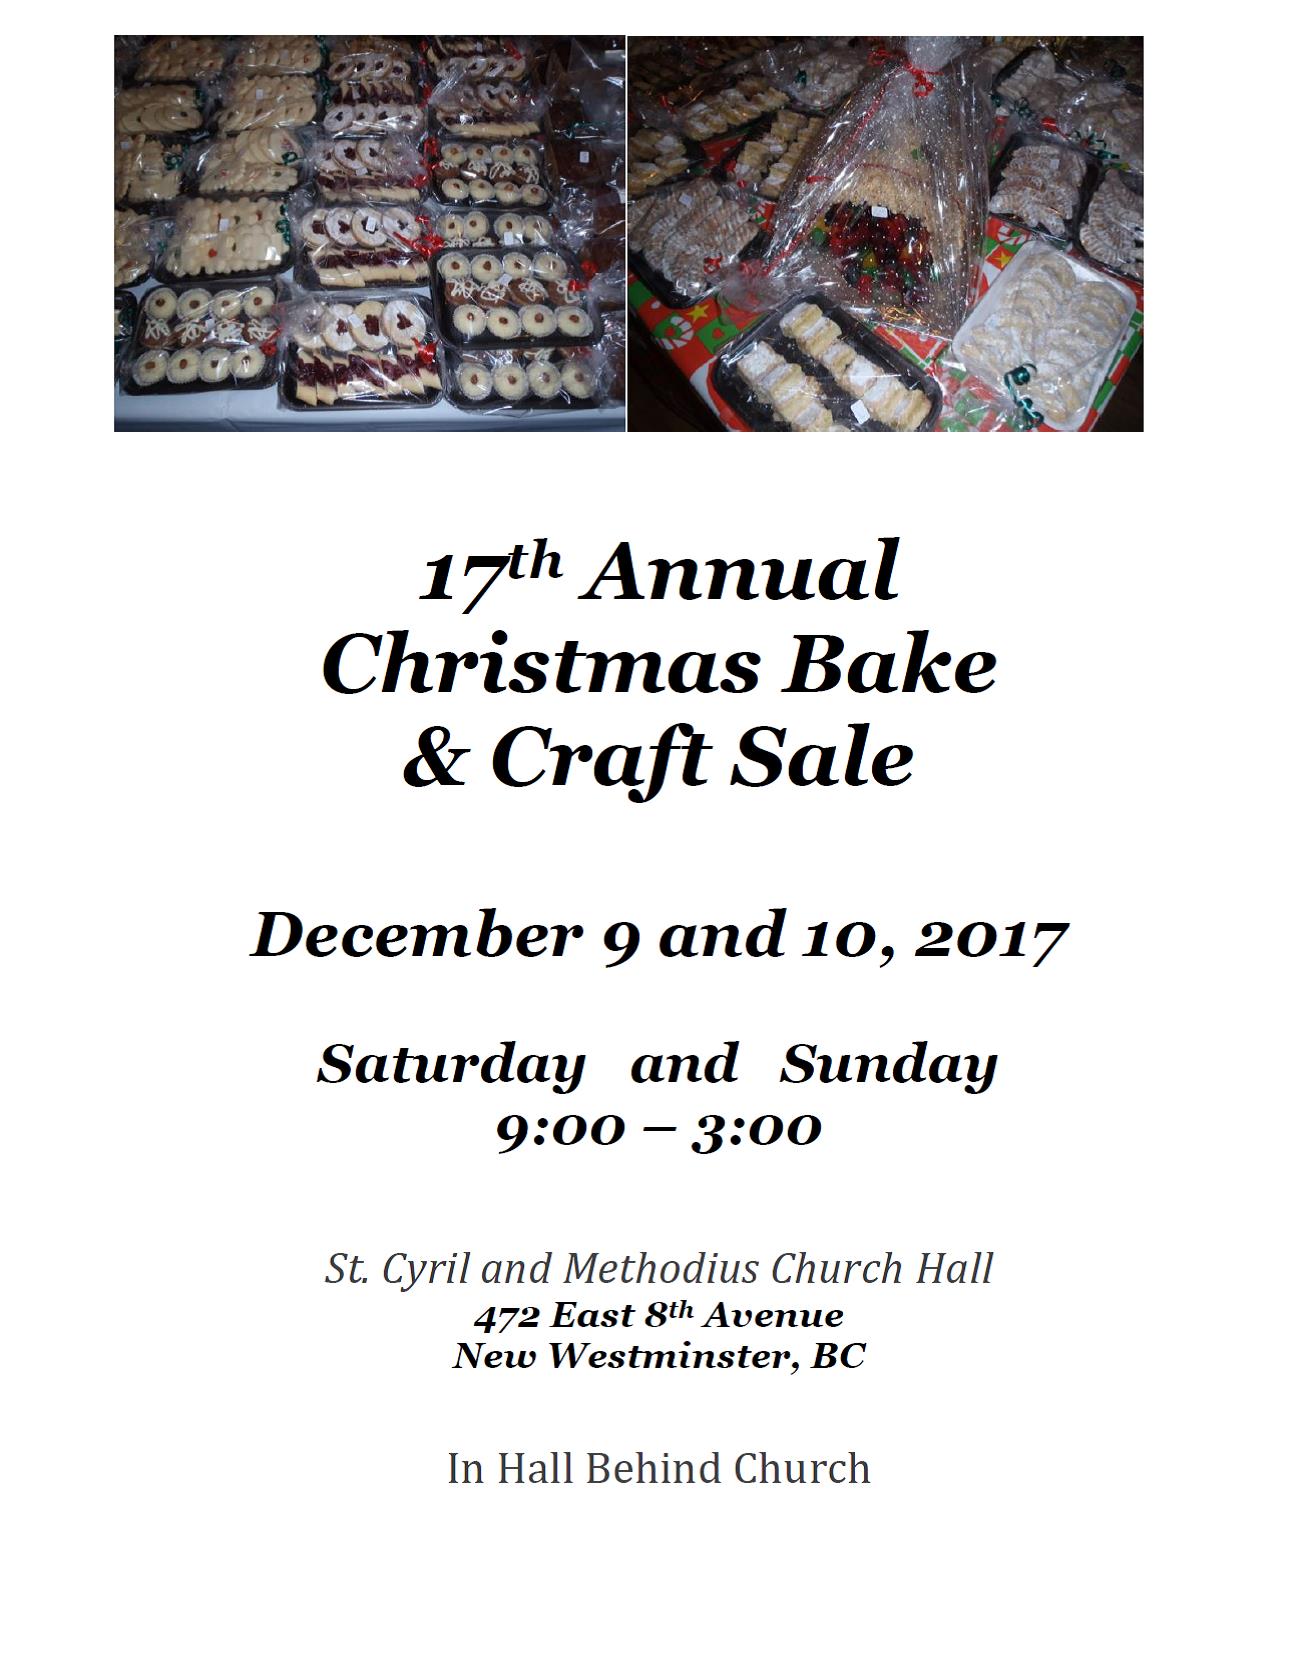 Craft and bake sale